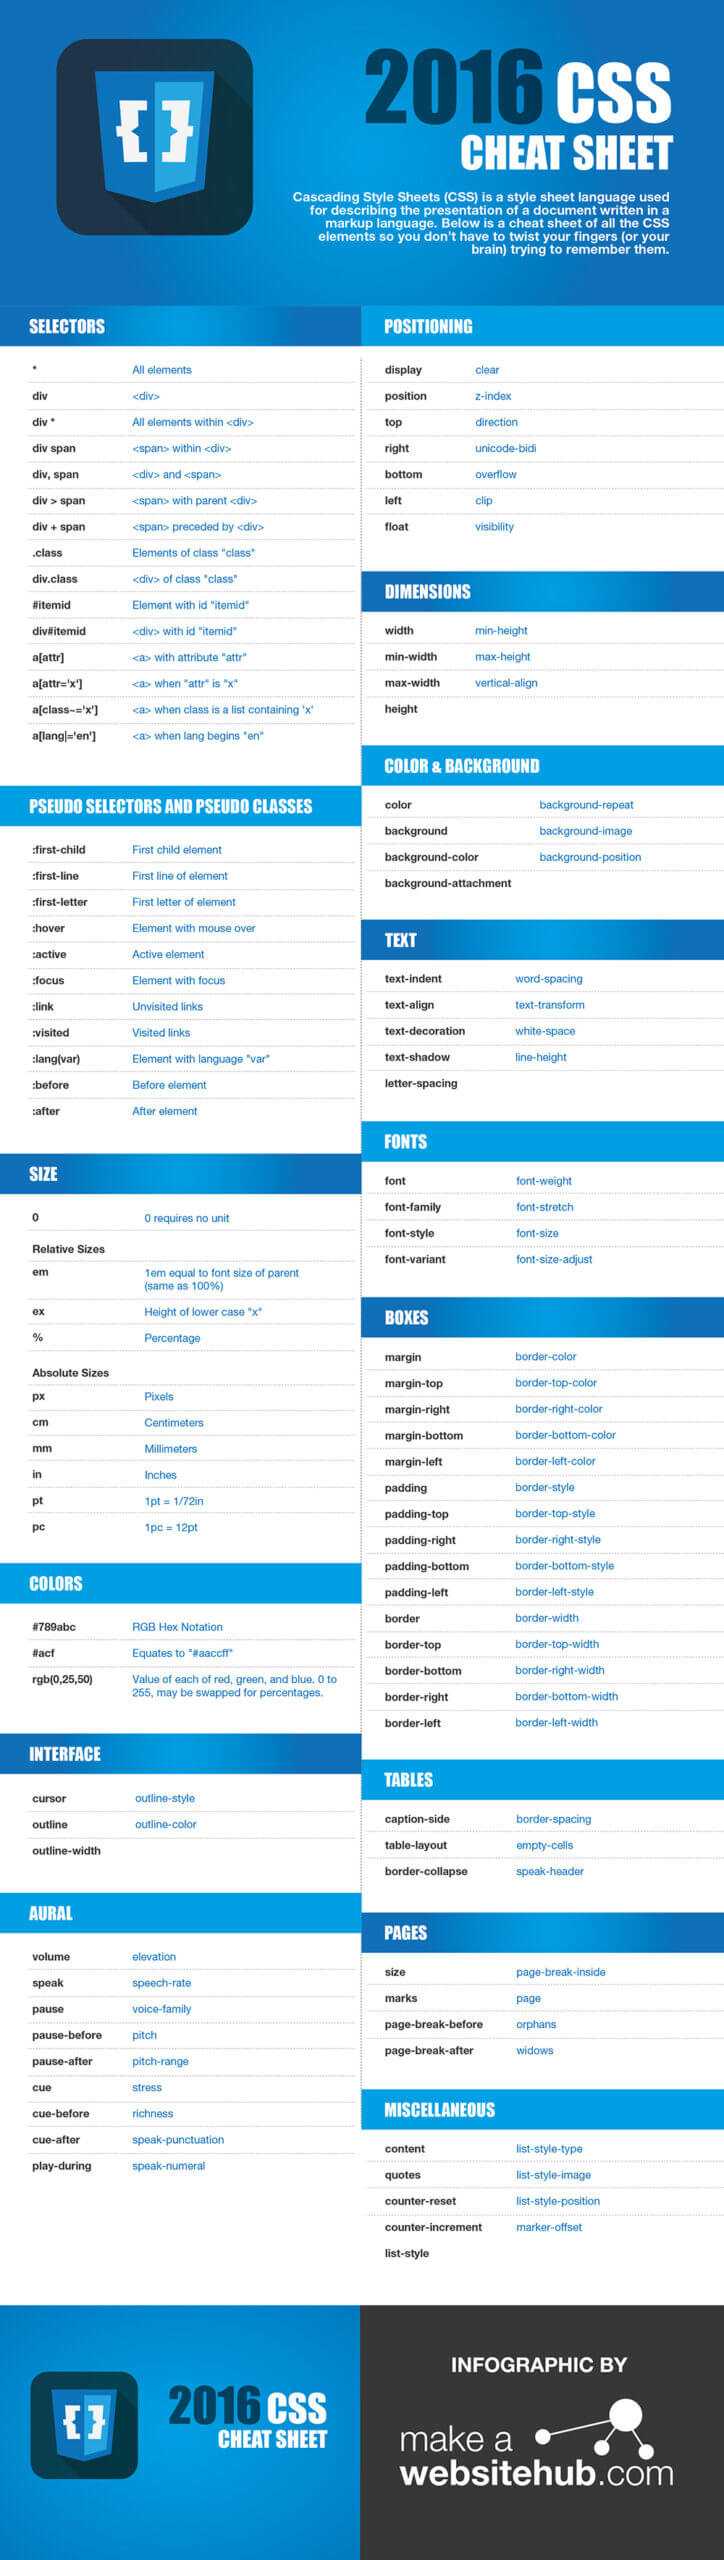 120 Great Cheat Sheets For Wordpress Web Developers And Within Cheat 